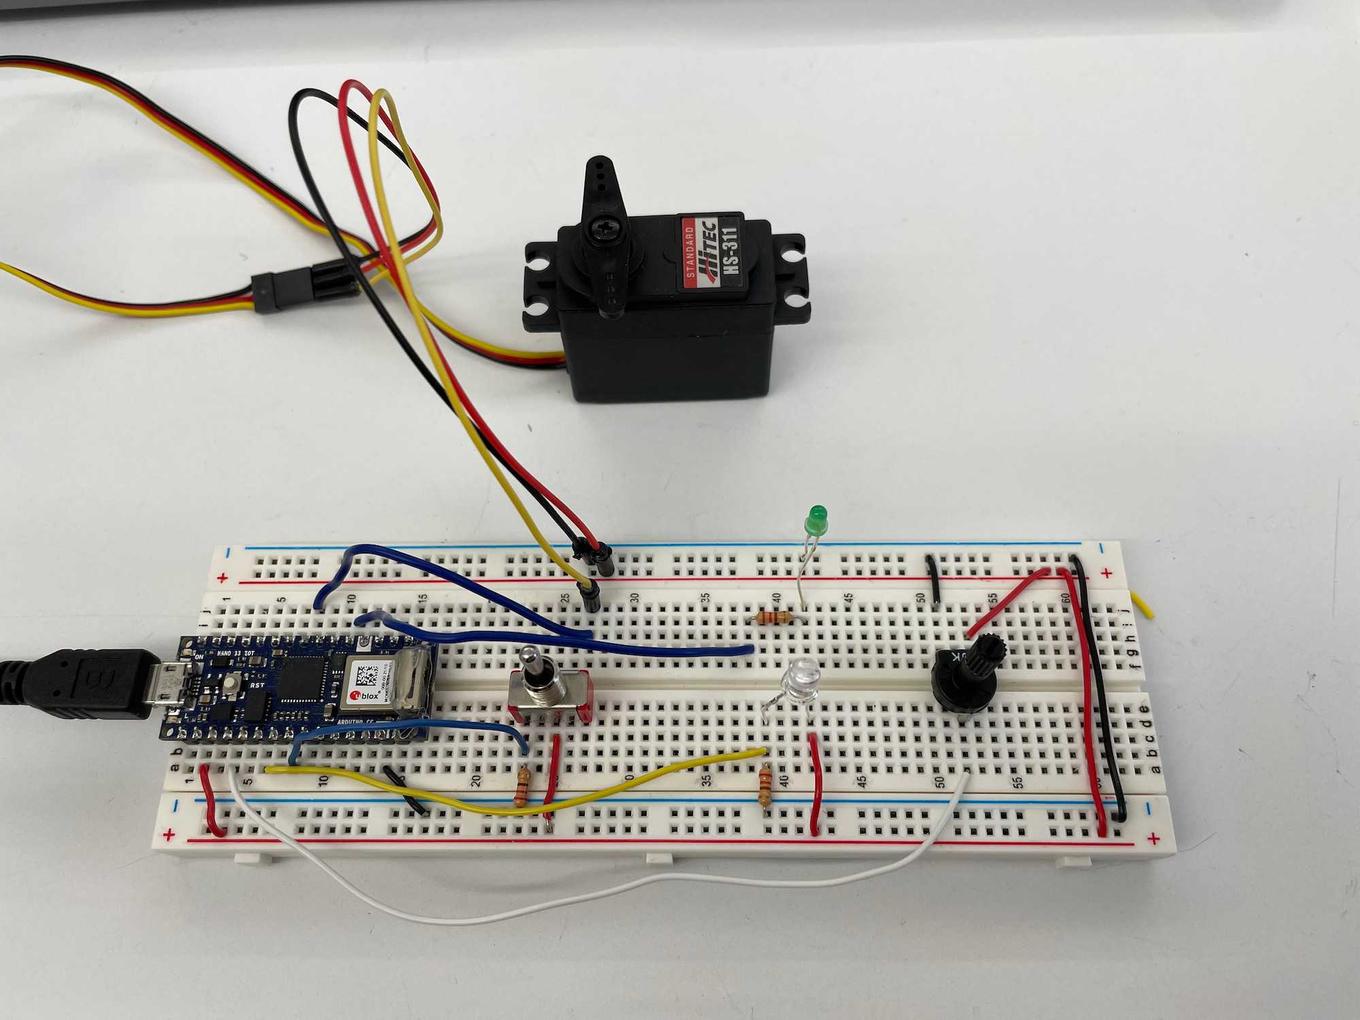 Breadboard setup for the proposed circuit